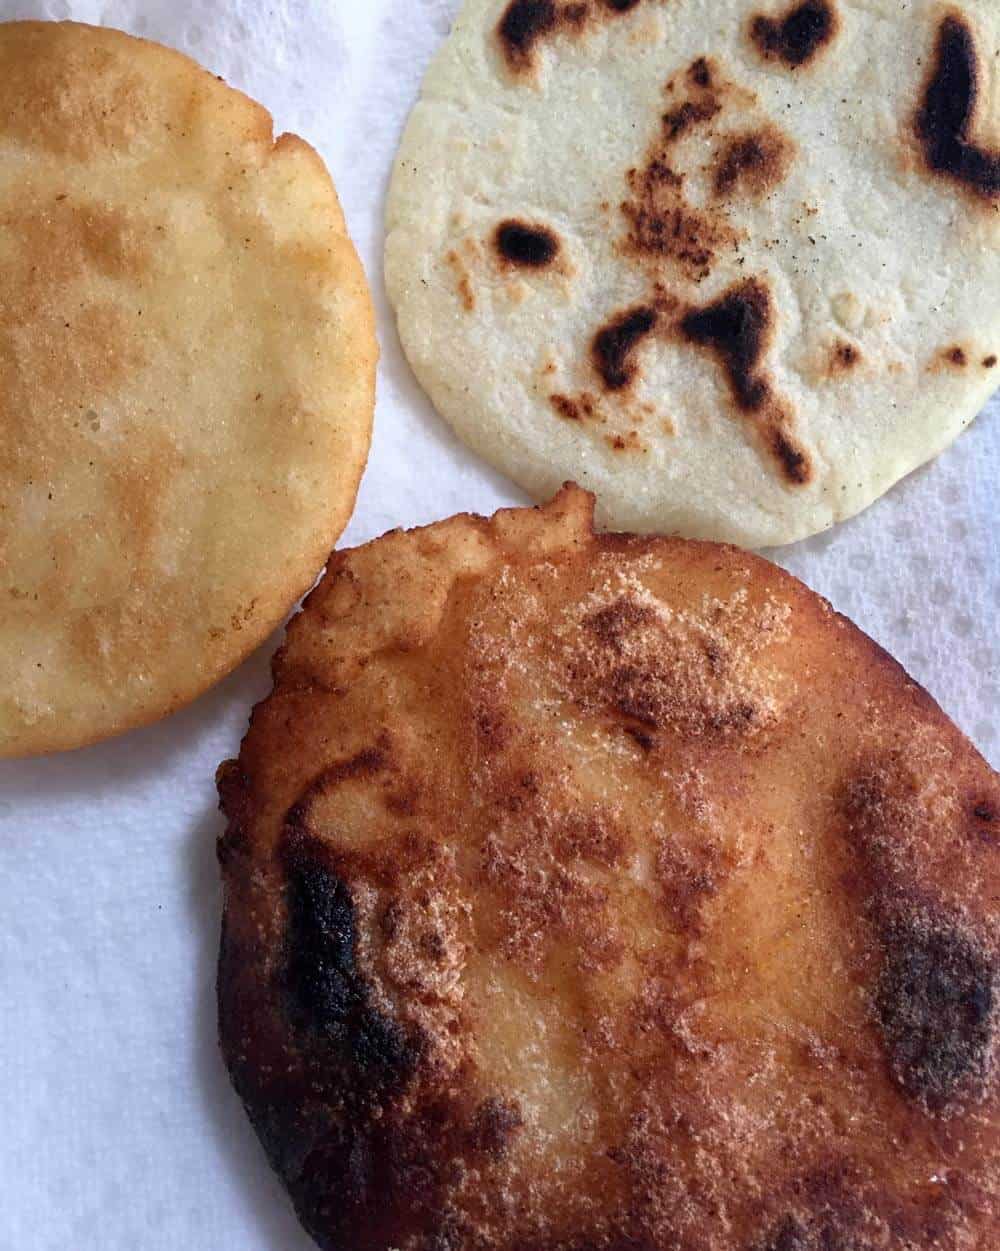 3 arepas cooked, on a paper towel